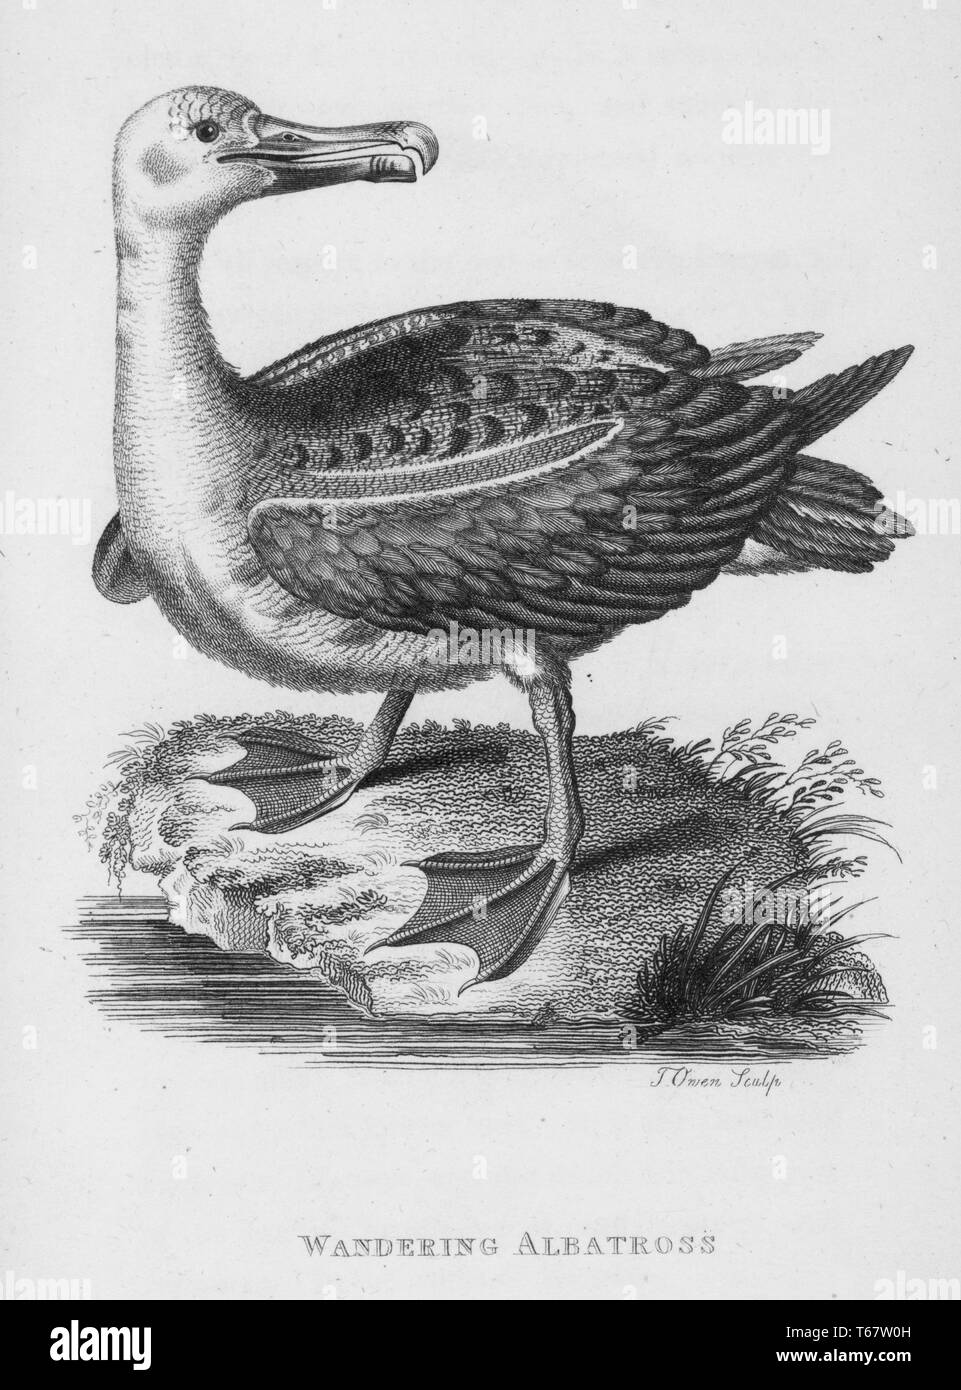 An engraving of a wandering albatross from the book 'Zoological Lectures Delivered at the Royal Institution' by George Shaw, 1809. From the New York Public Library. Stock Photo